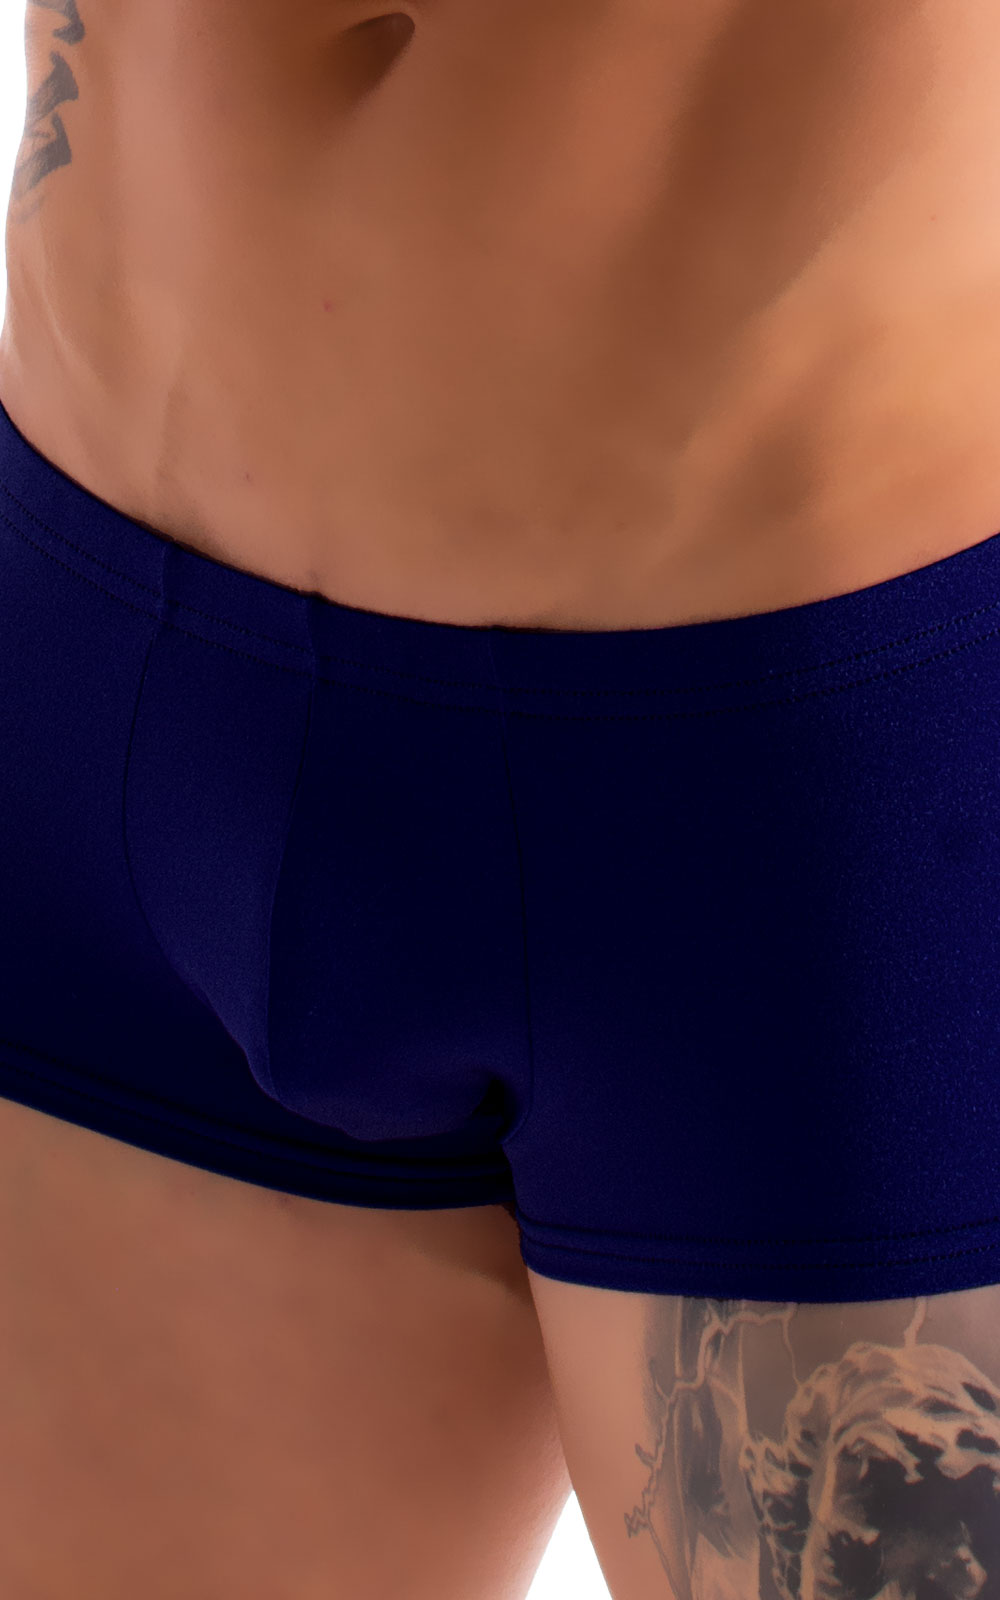 Fitted Pouch - Boxer - Swim Trunks in ThinSkinz Navy Blue 6